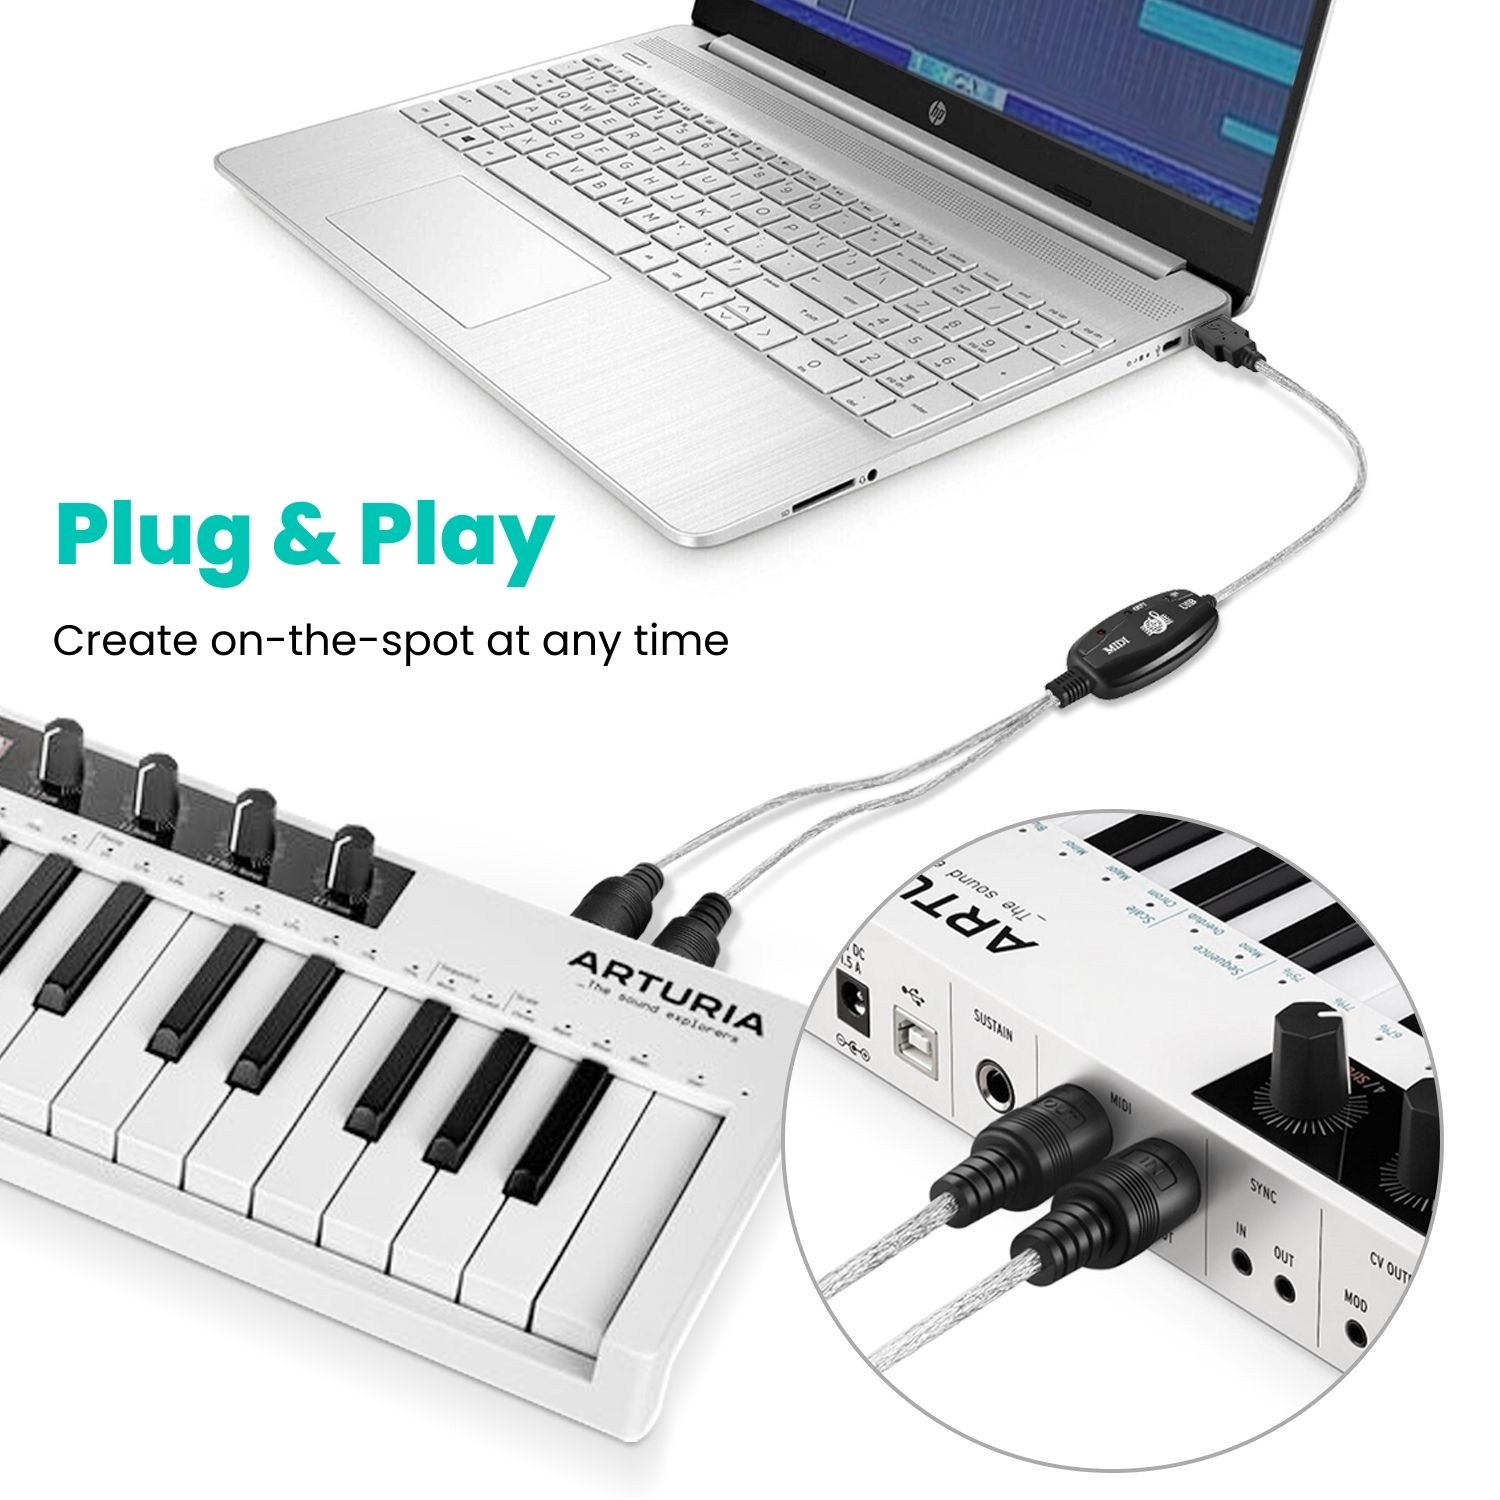 Broad Compatibility - These MIDI cables connect your MIDI-equipped instruments to your PC, Laptops, Mac, and Android devices via the USB port Type A or Type C